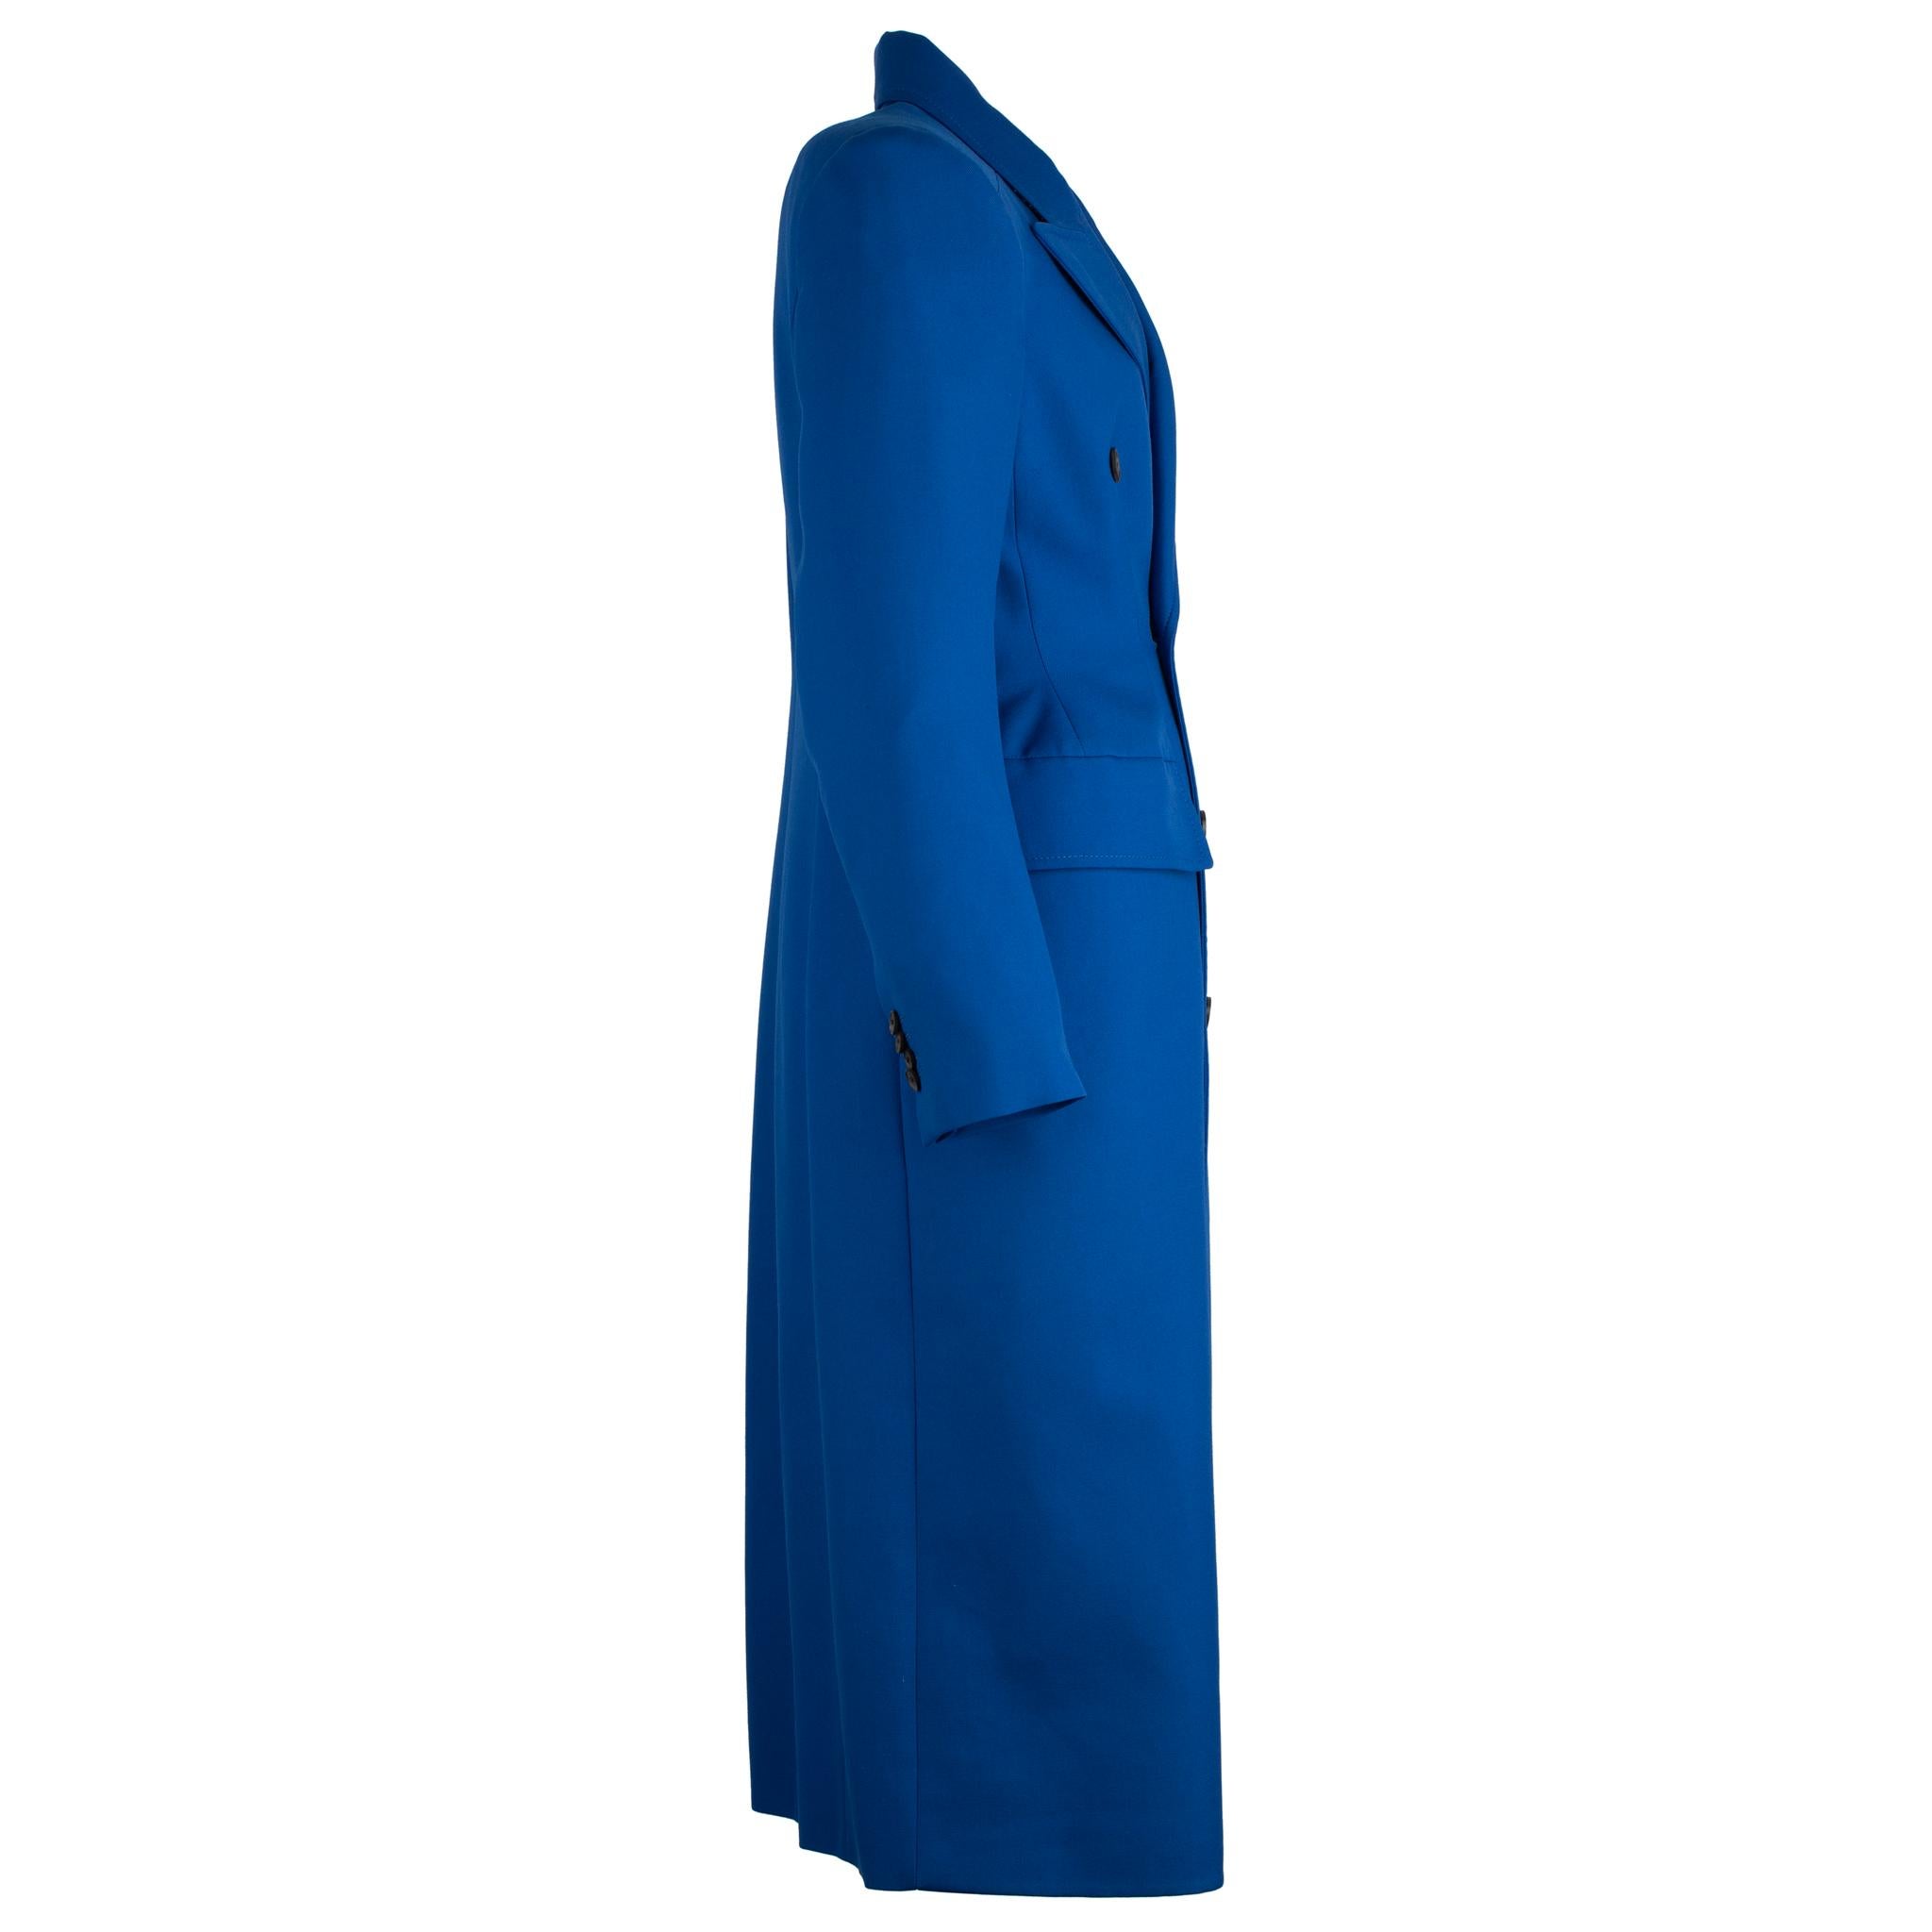 Balenciaga Hourglass Double Breasted Wool Blend Coat Royal Blue 38 FR For Sale 4